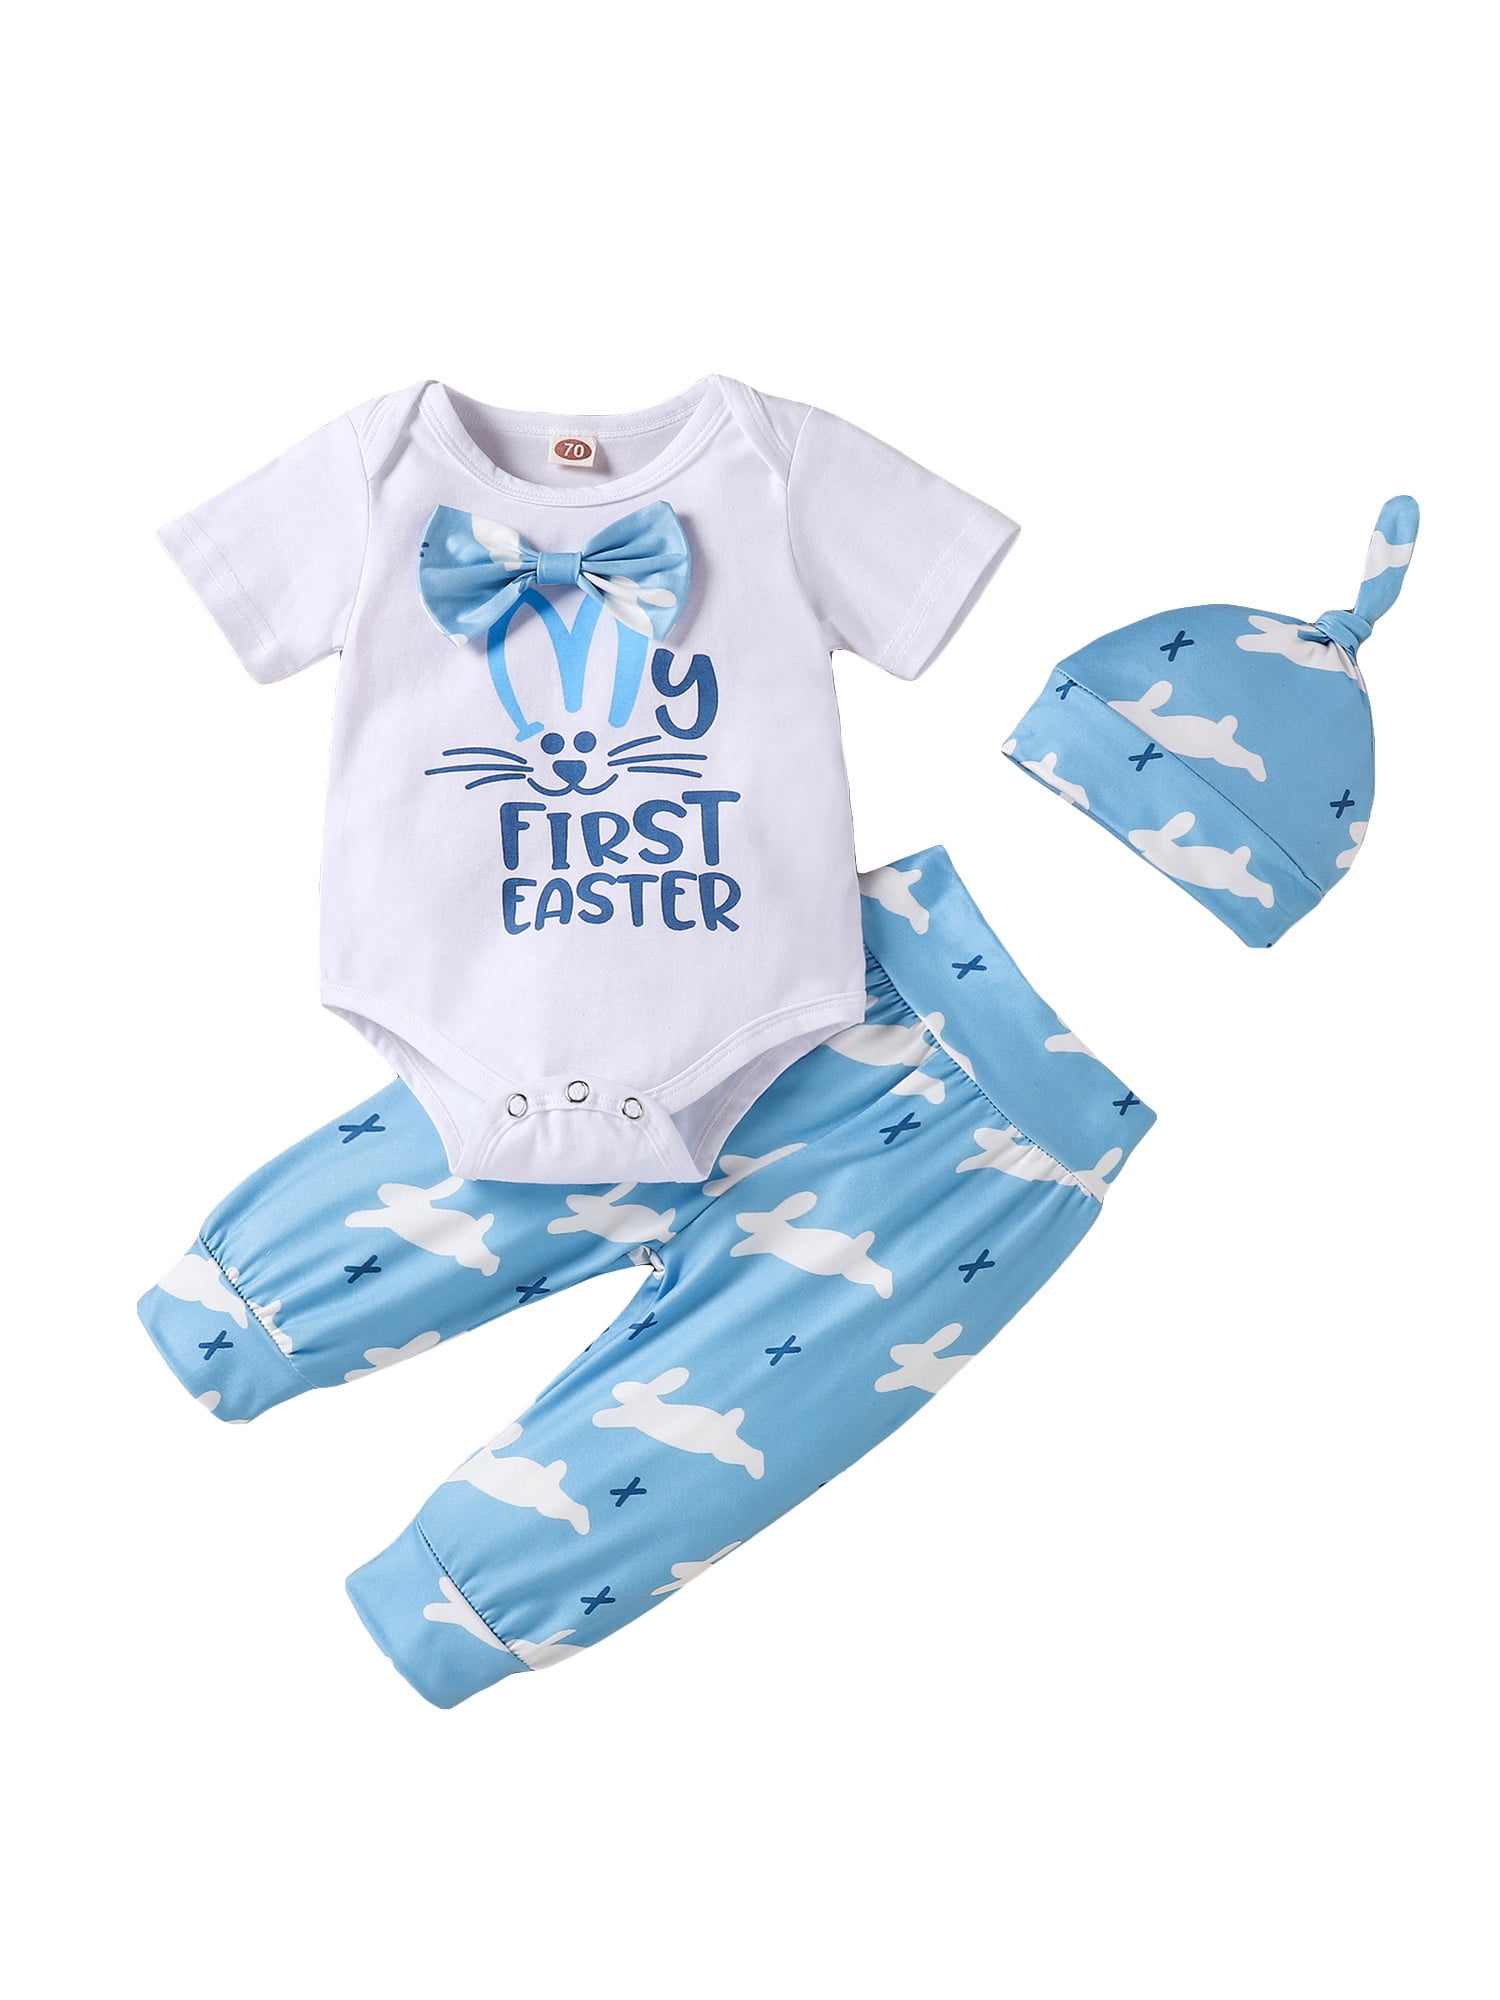 1st Easter Outfit Boy Outlet Deals, 45% OFF | connect-summary.com